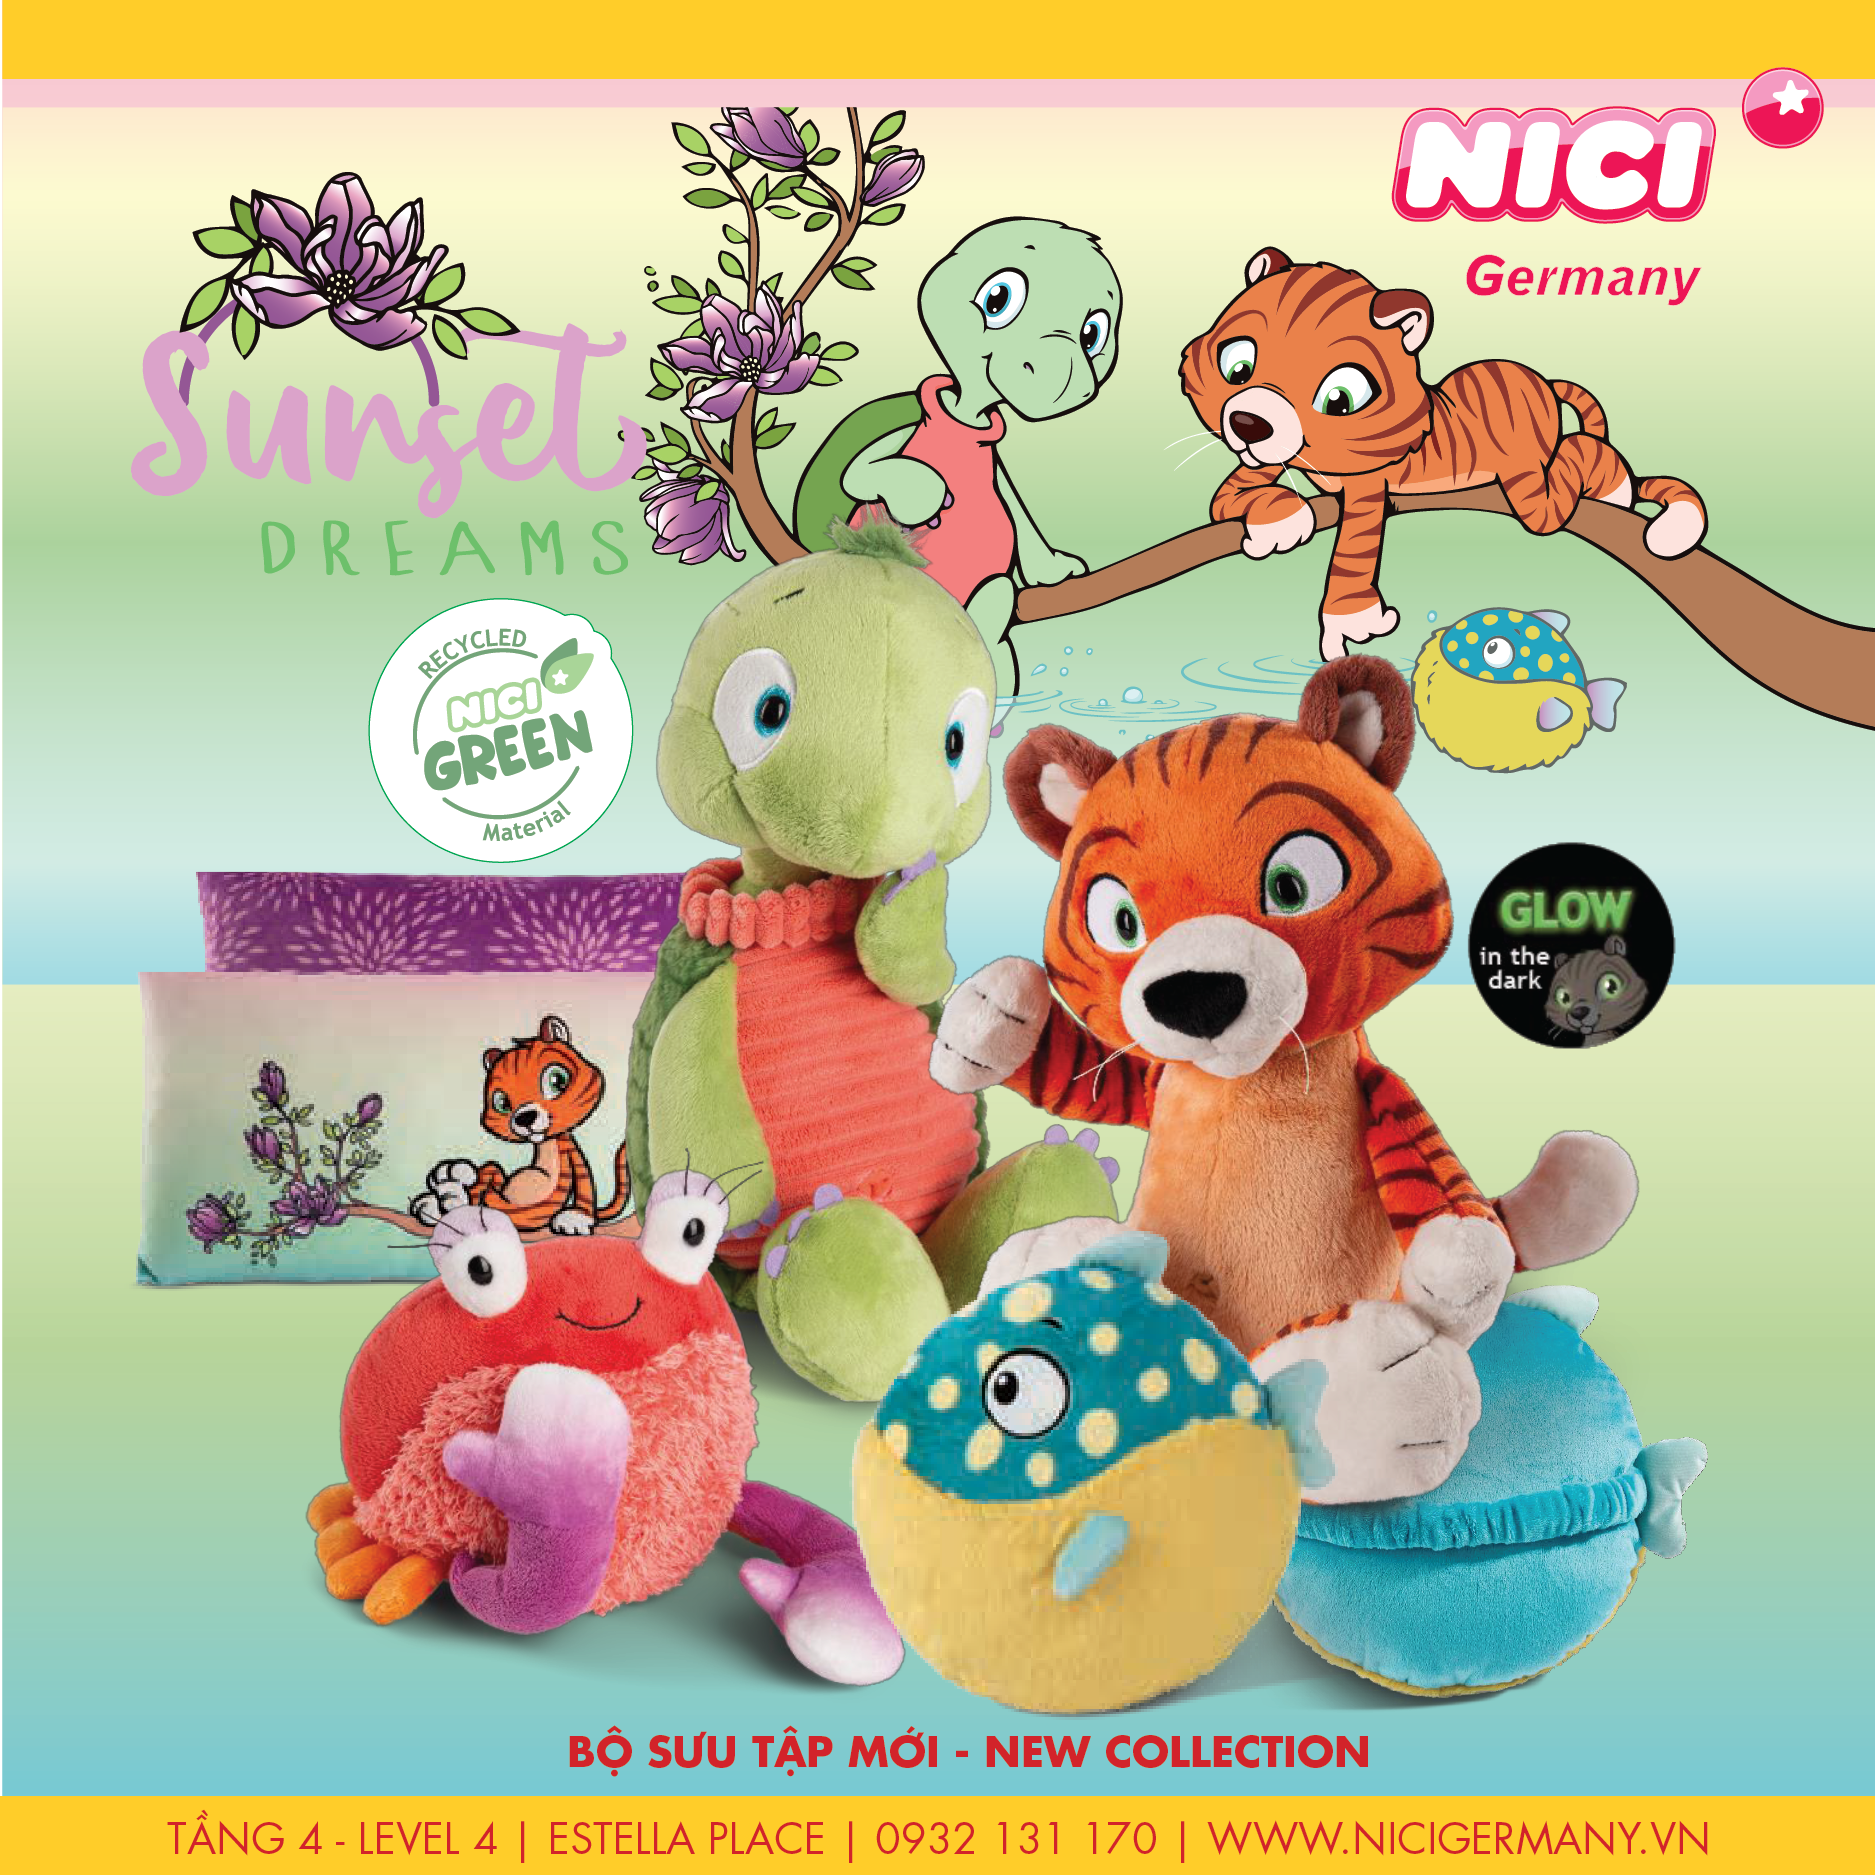 NICI GERMANY NEW COLLECTION "SUNSET DREAMS"